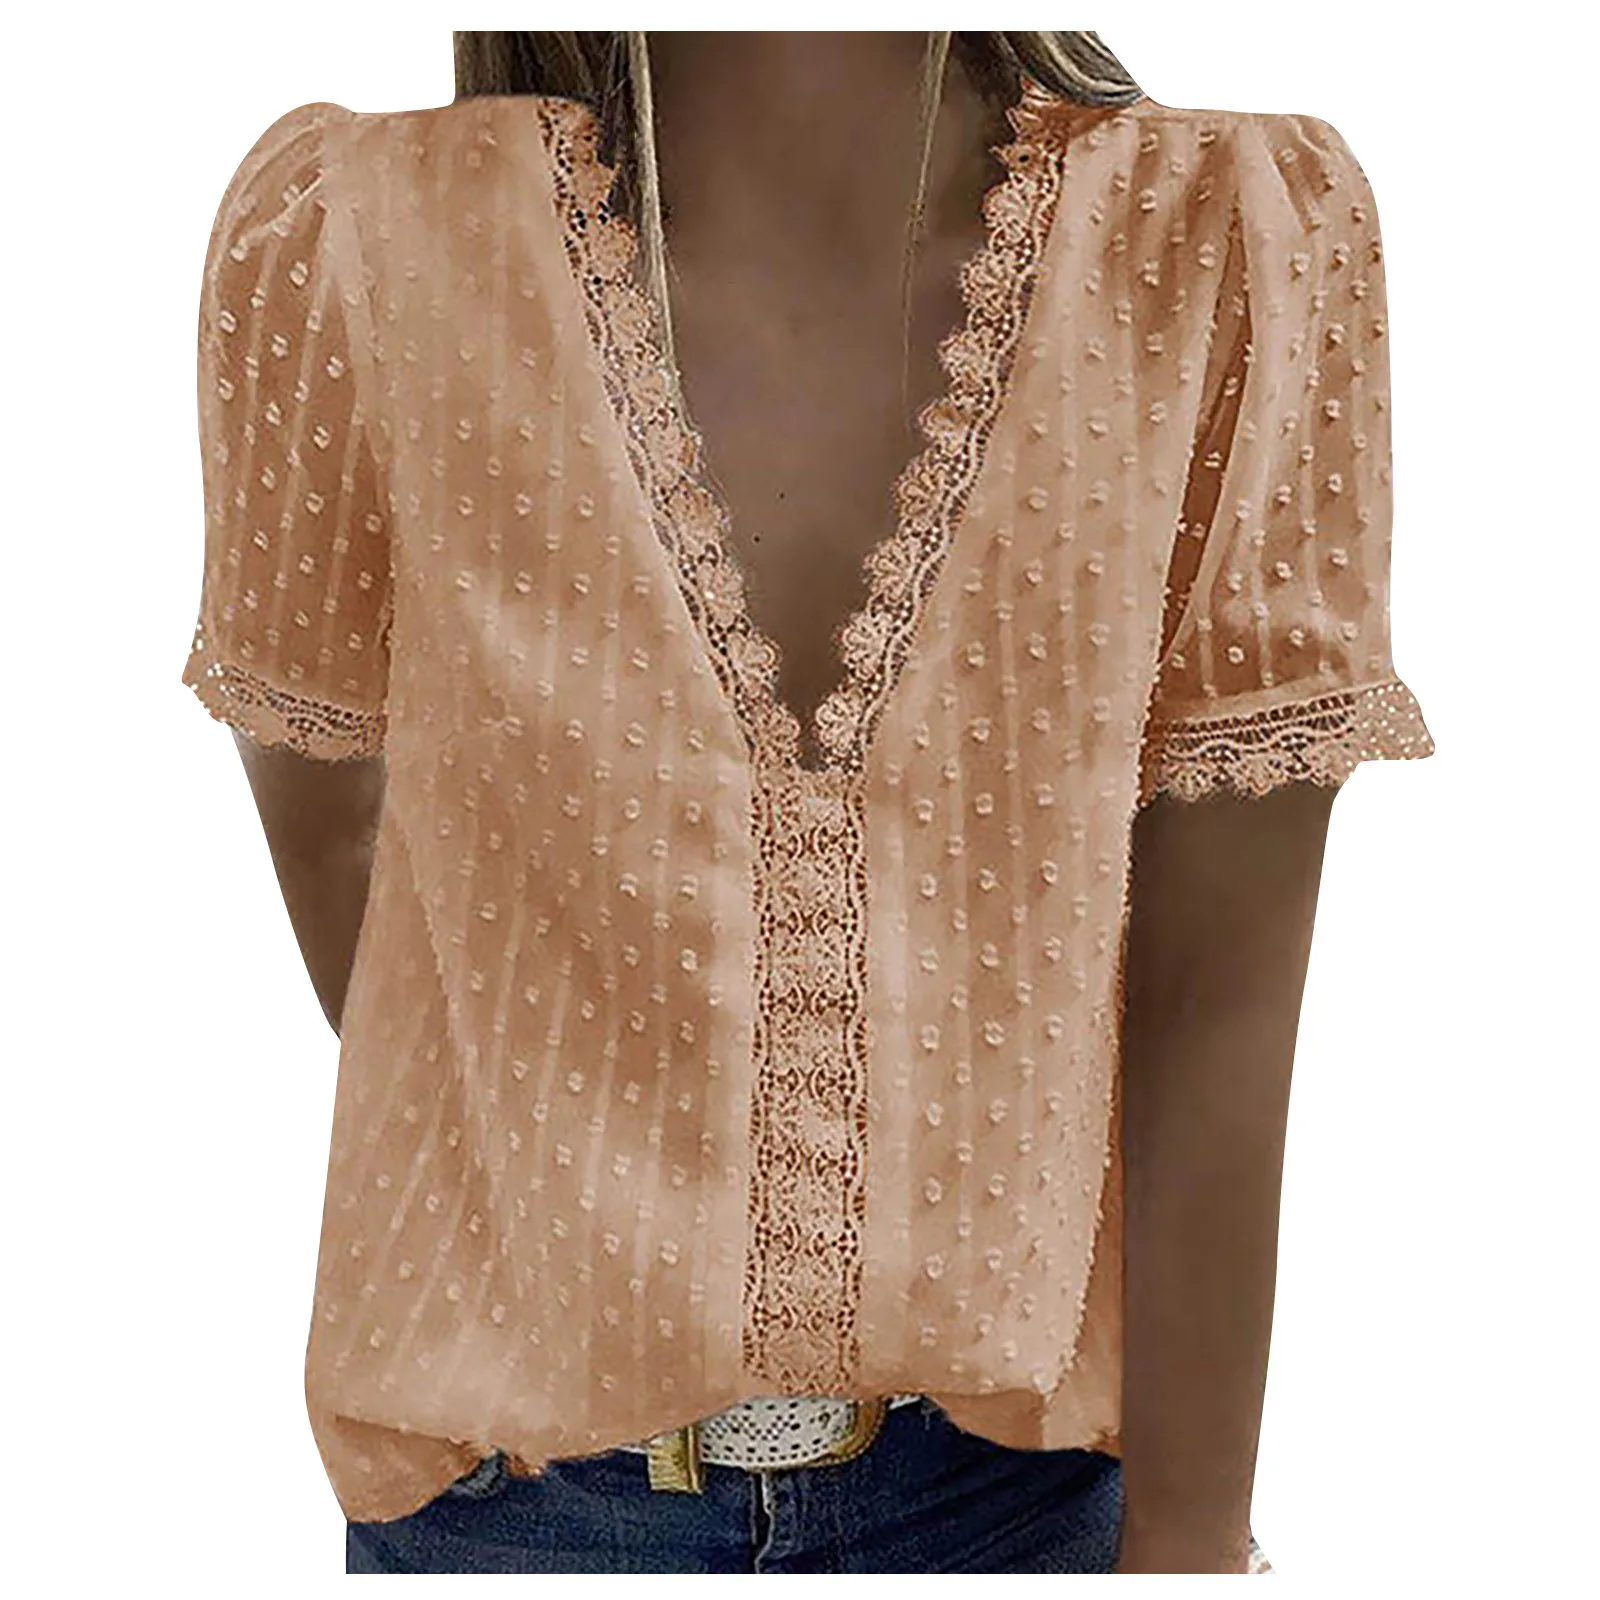 Women Blouse Tops Lace Short Sleeve Large size Loose Casual shirt V-neck Solid Color Top Summer Casual Blouses 